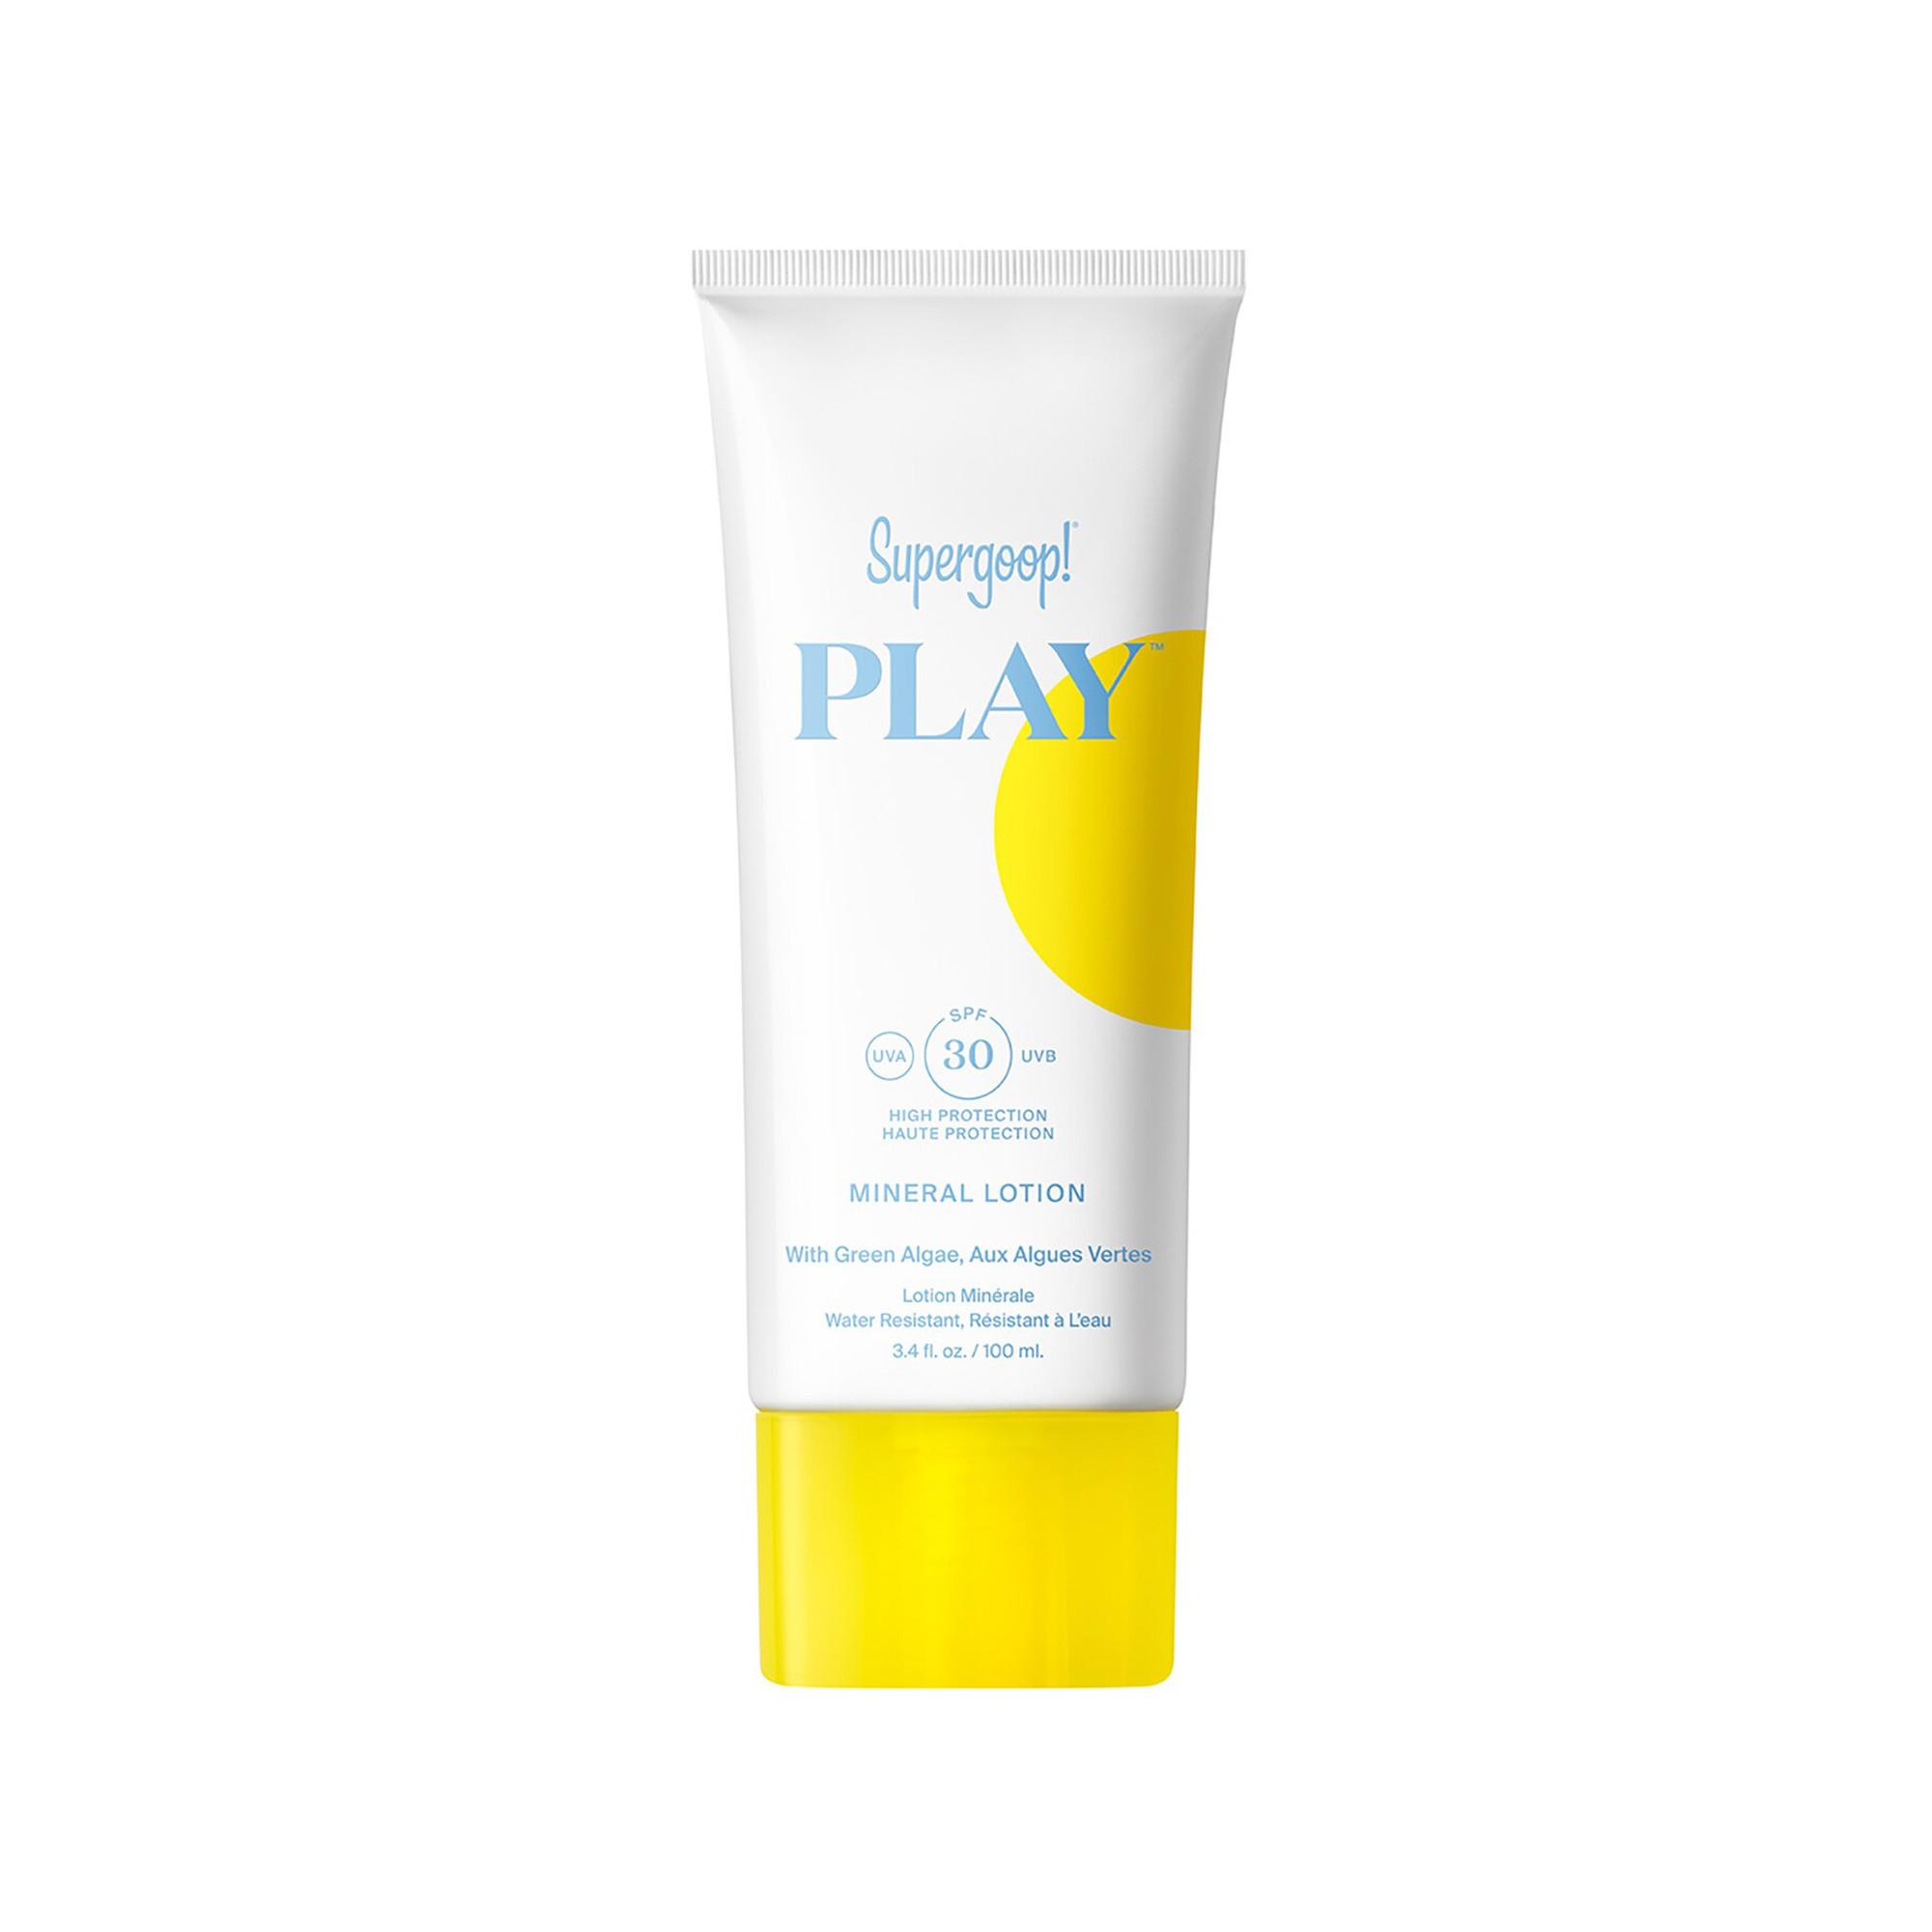 Supergoop PLAY Lotion Minérale SPF 30 Lotion Solaire 